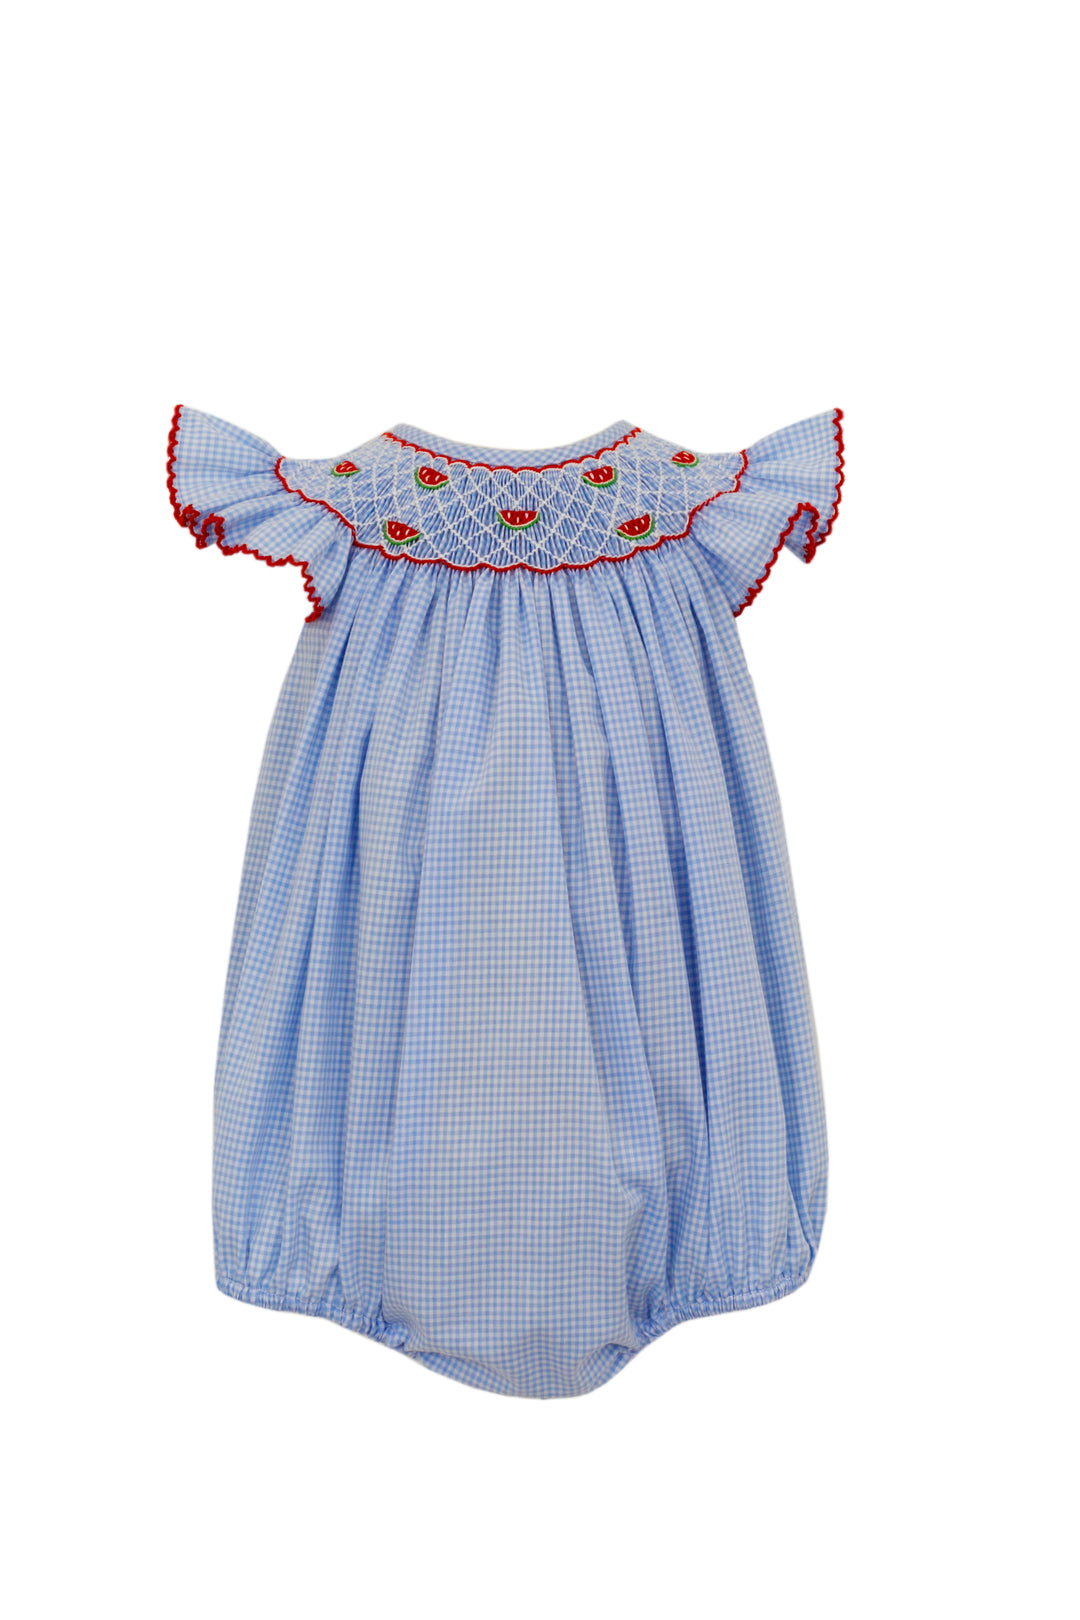 Blue Gingham Sunbubble with Watermelon Smocking